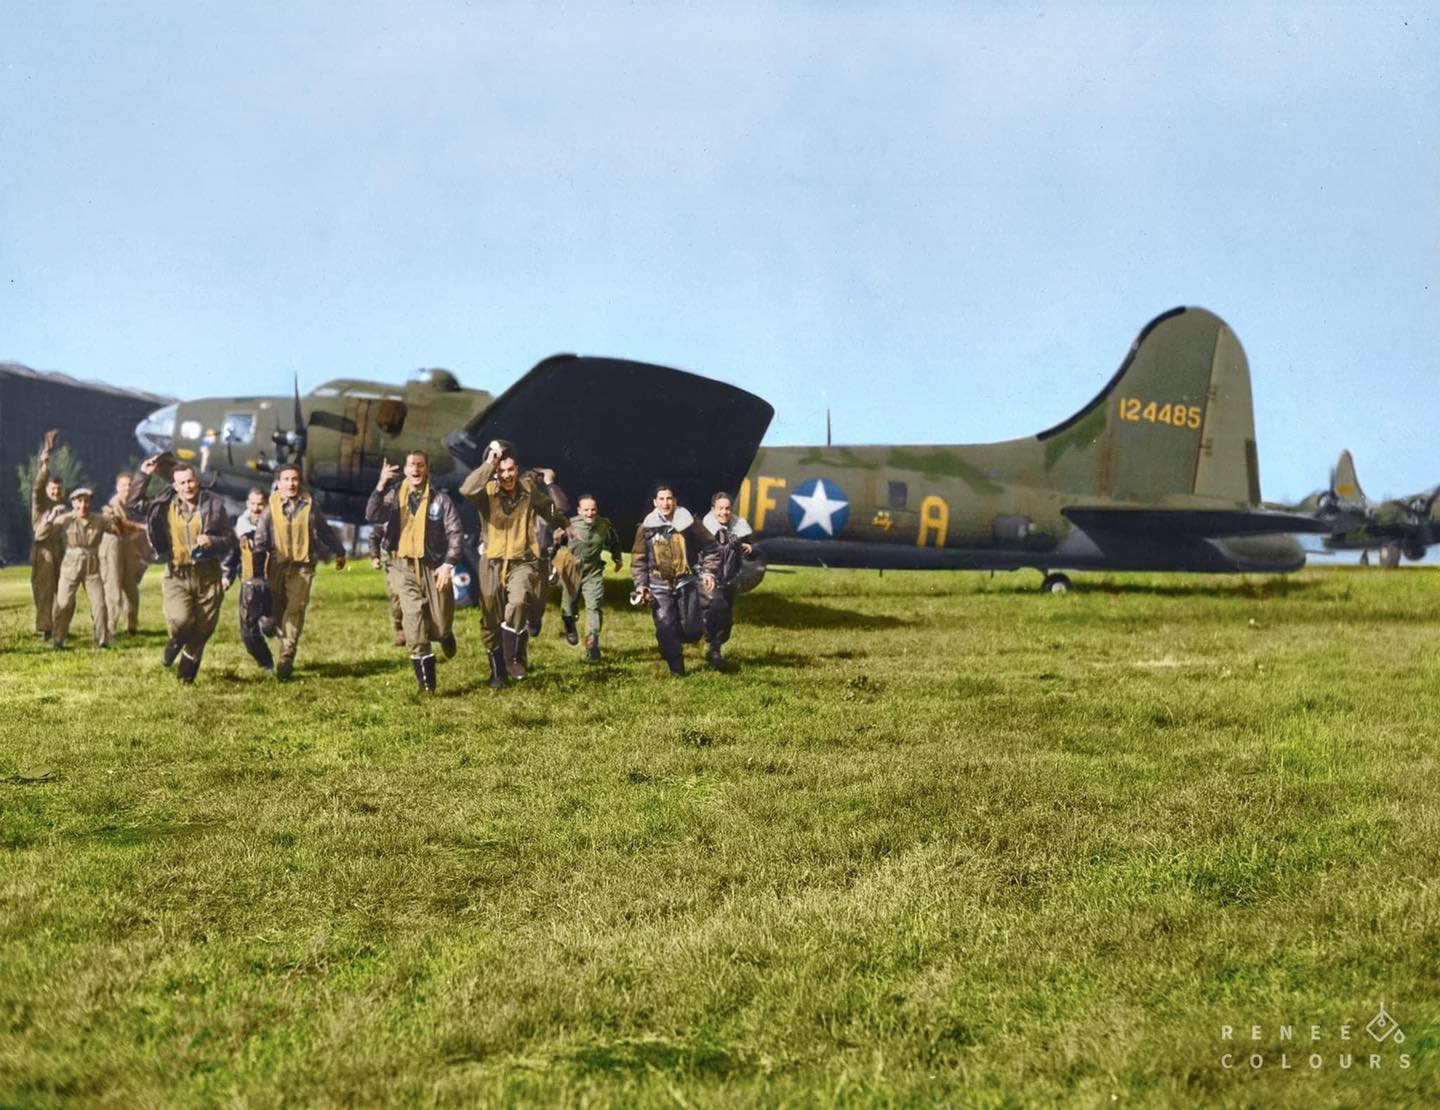 memphis belle back from 25th mission.jpg